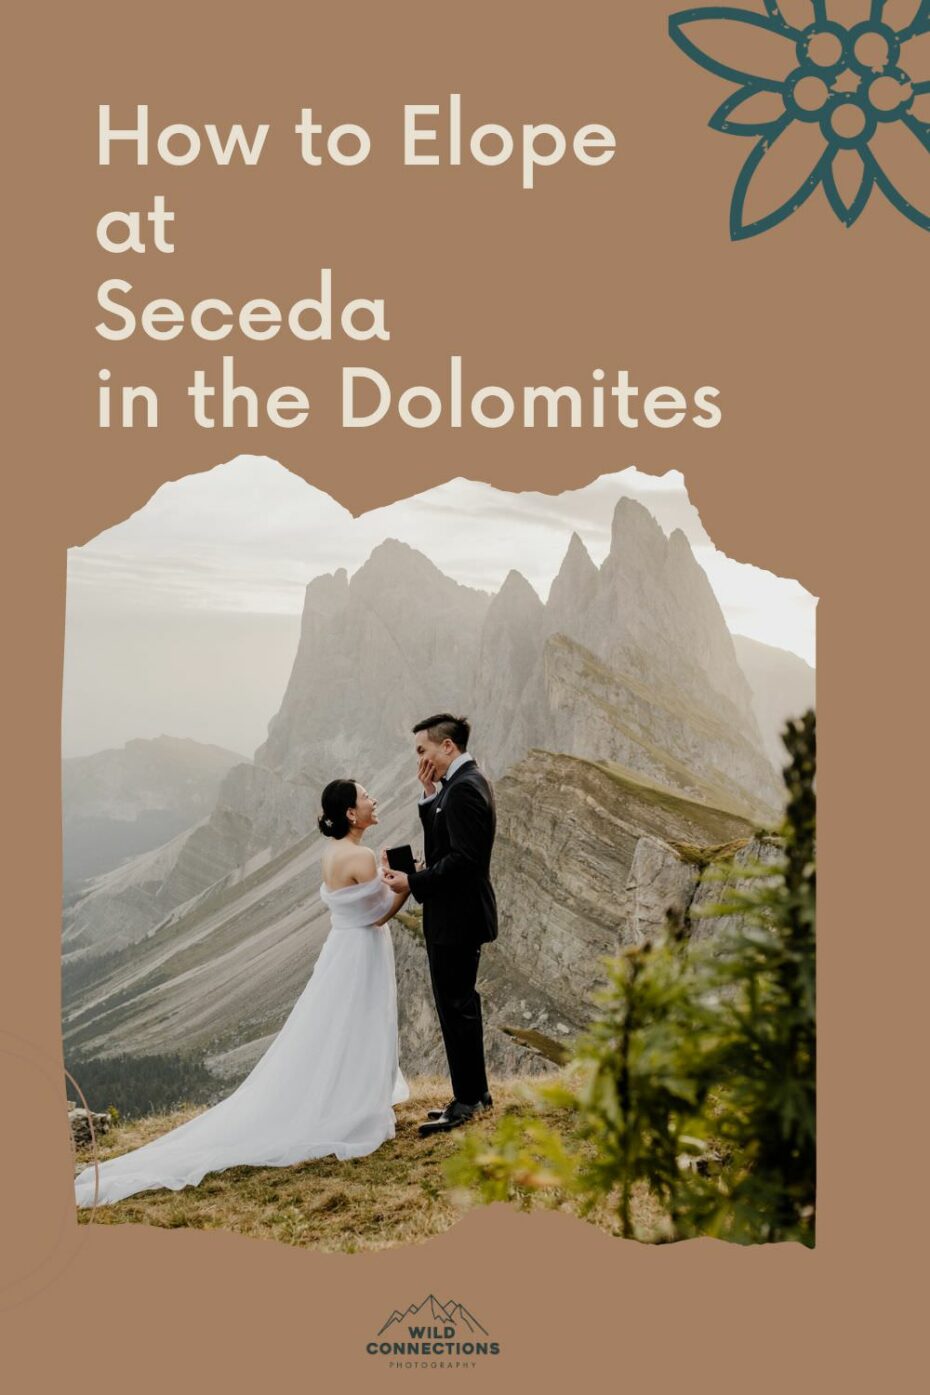 How to elope at Seceda. inthe Dolomites